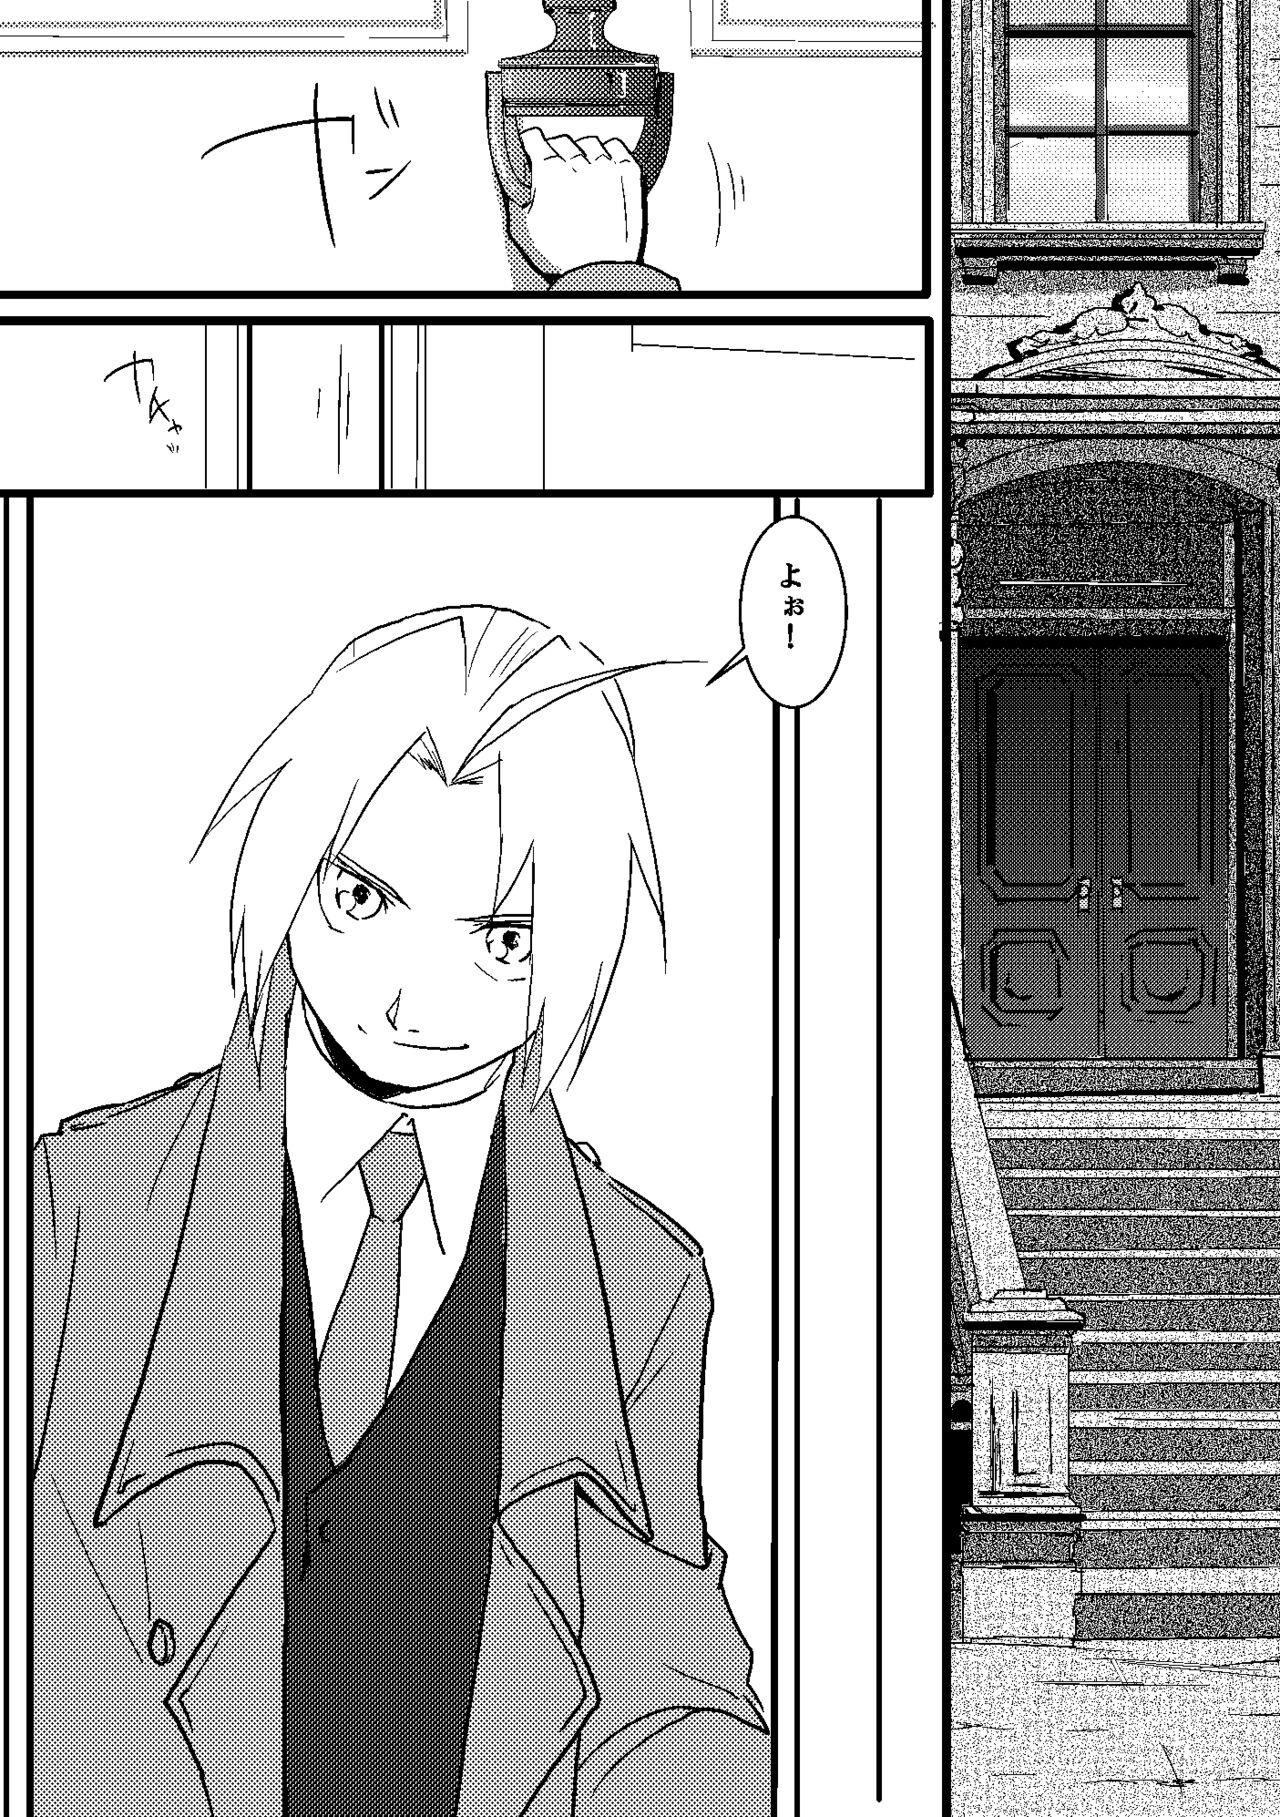 Butts After that and then - Fullmetal alchemist | hagane no renkinjutsushi Interacial - Page 2